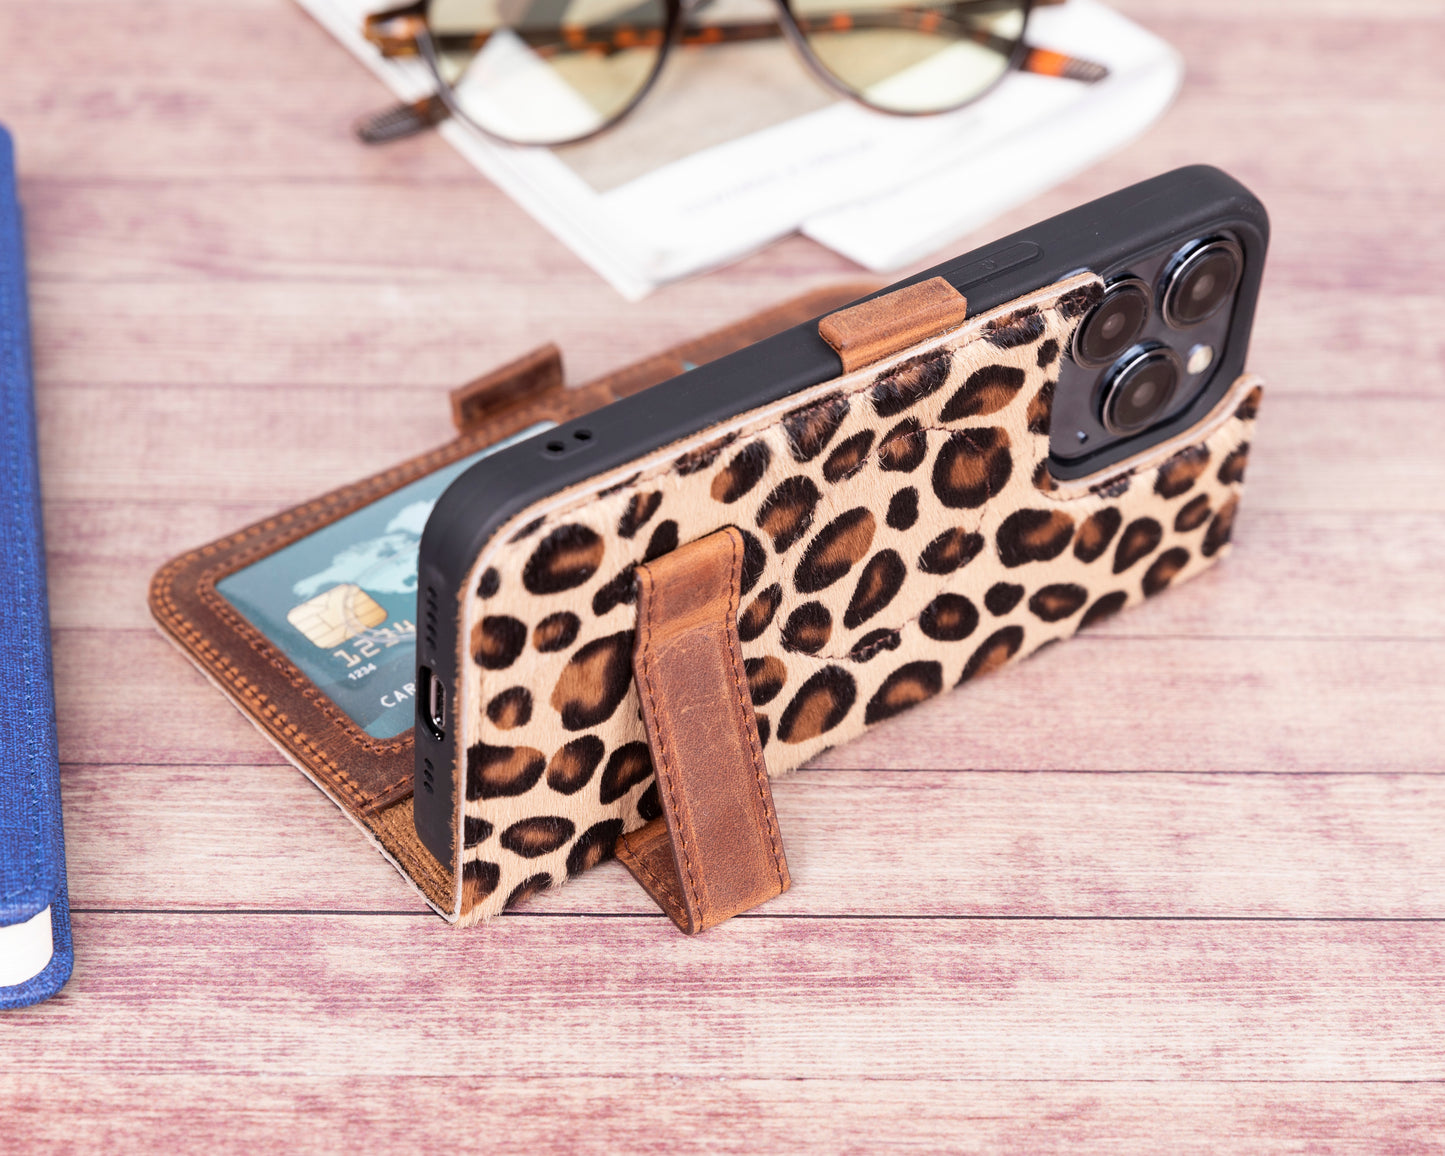 iPhone 13 Pro (6.1") Leather MagSafe Stand Wallet Case RFID Protection  - furry Leopard